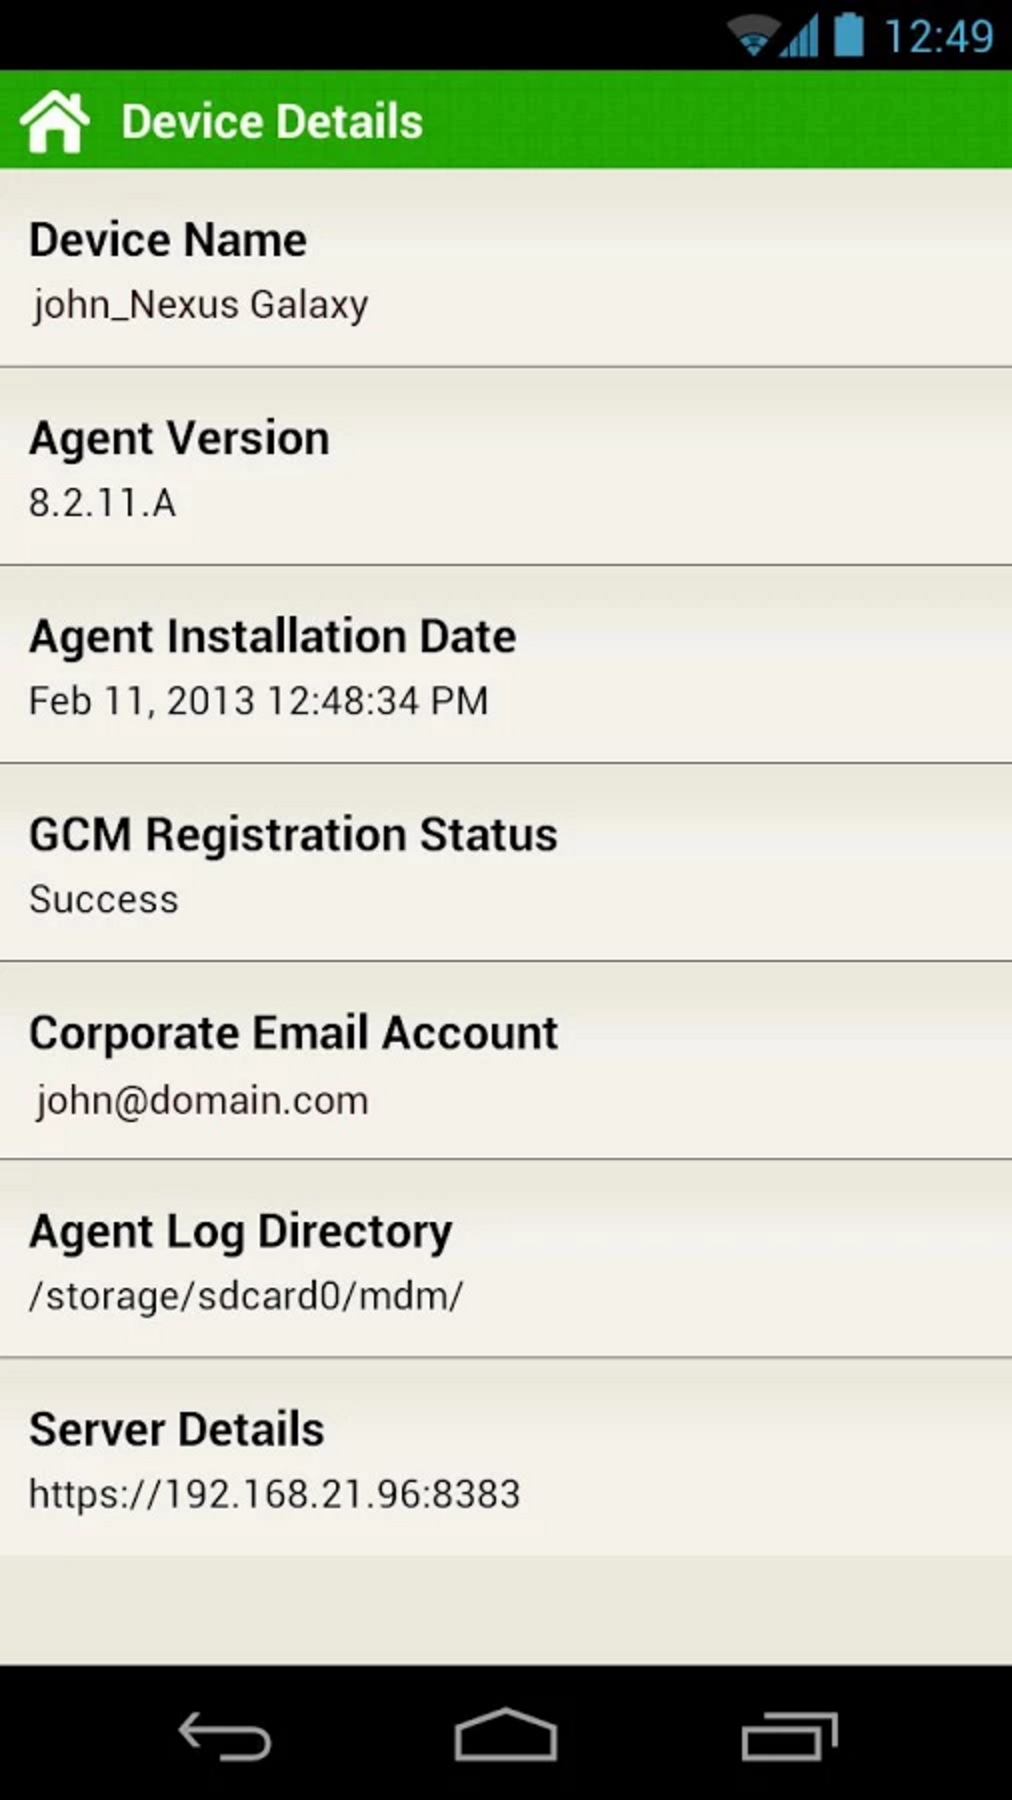 ManageEngine Mobile Device Manager Plus Software - Device Details